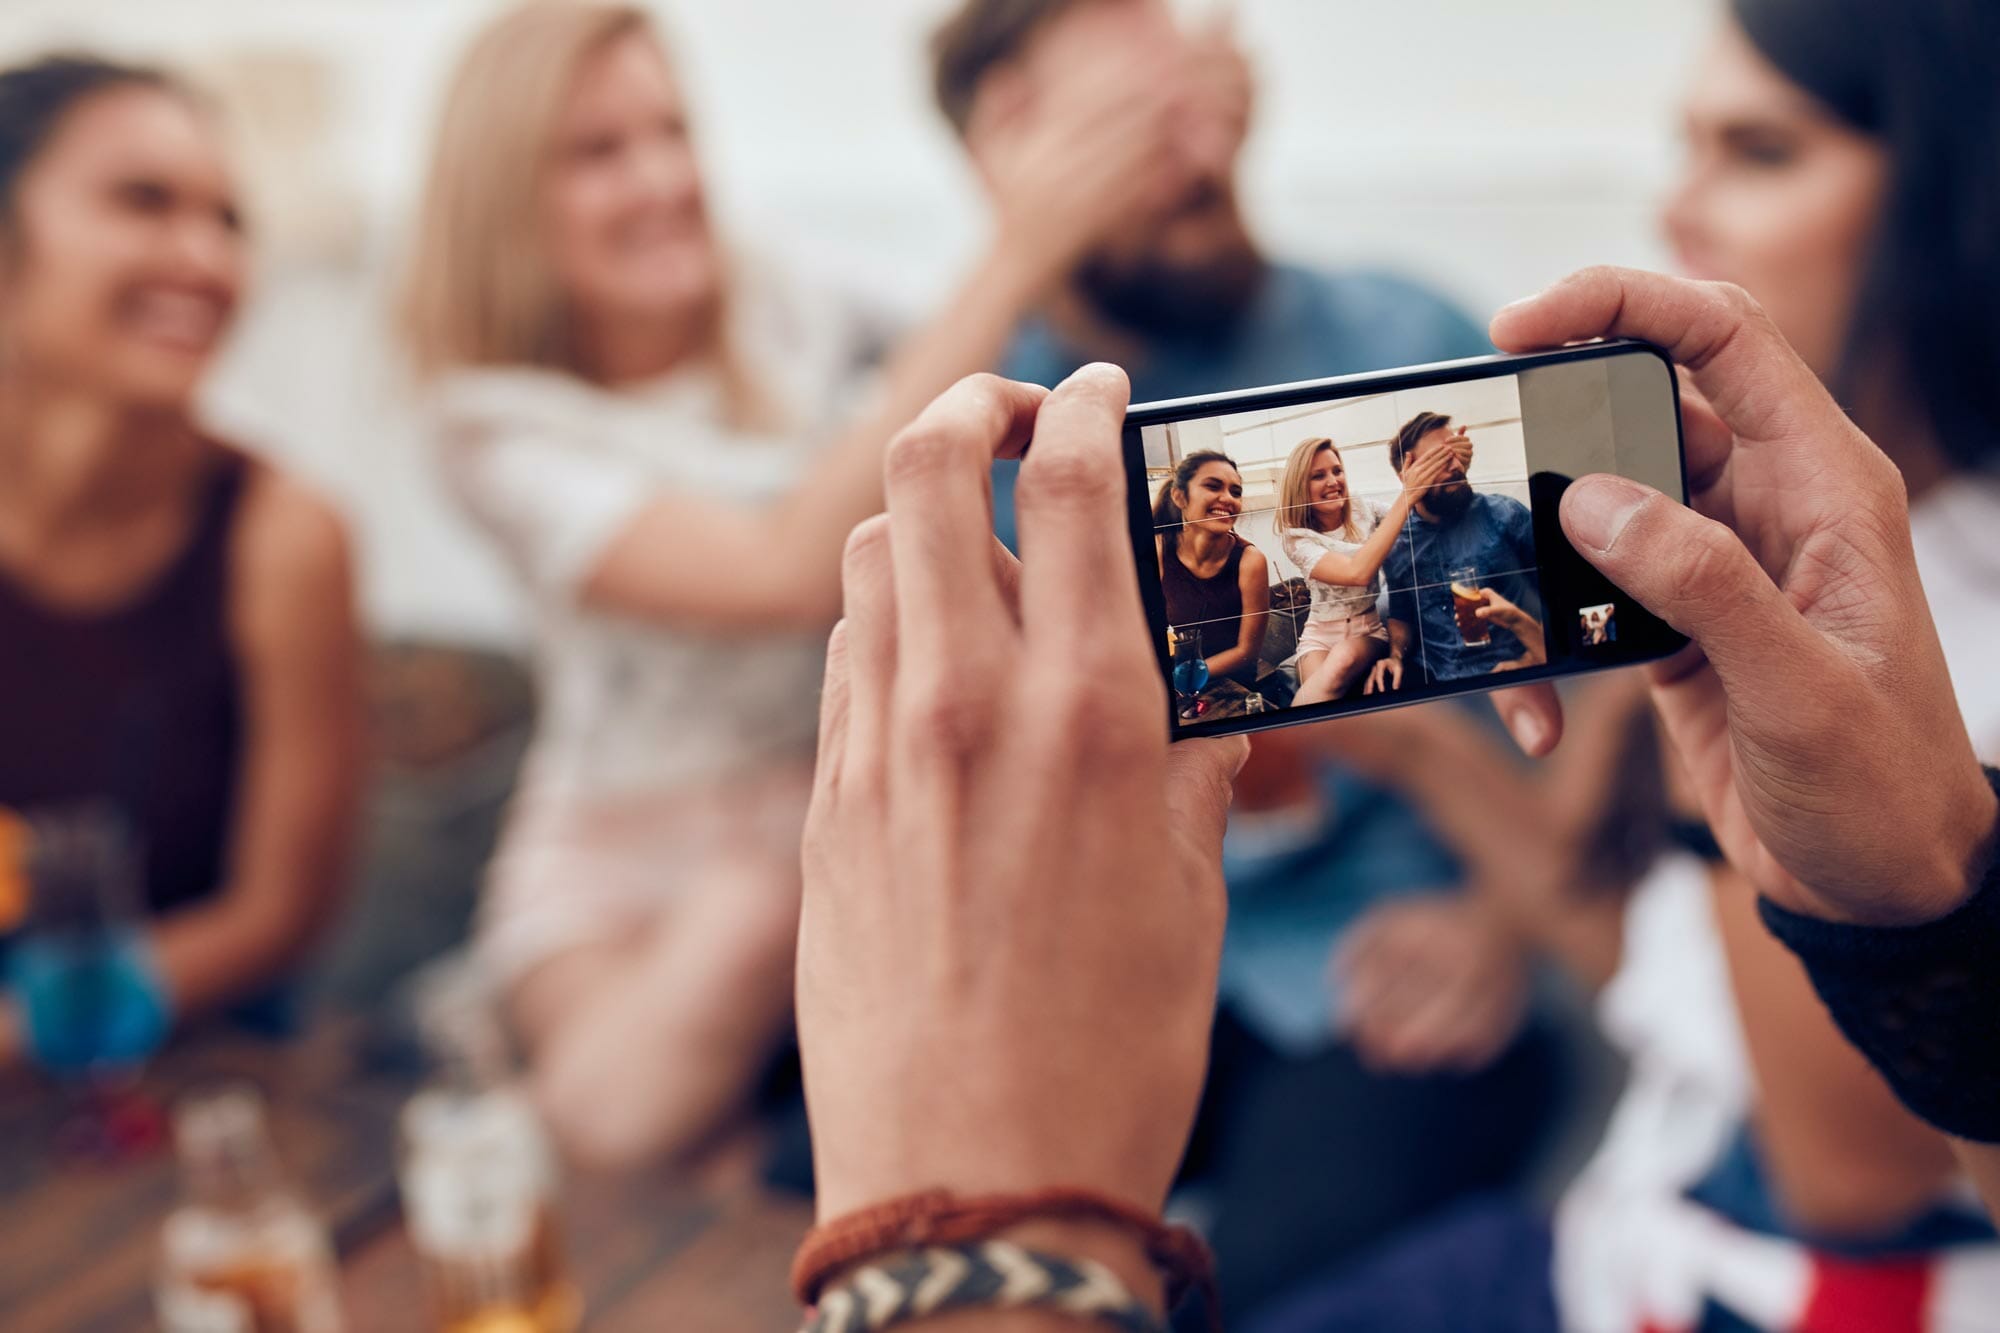 man holding a phone to photograph a group of friends at a party.